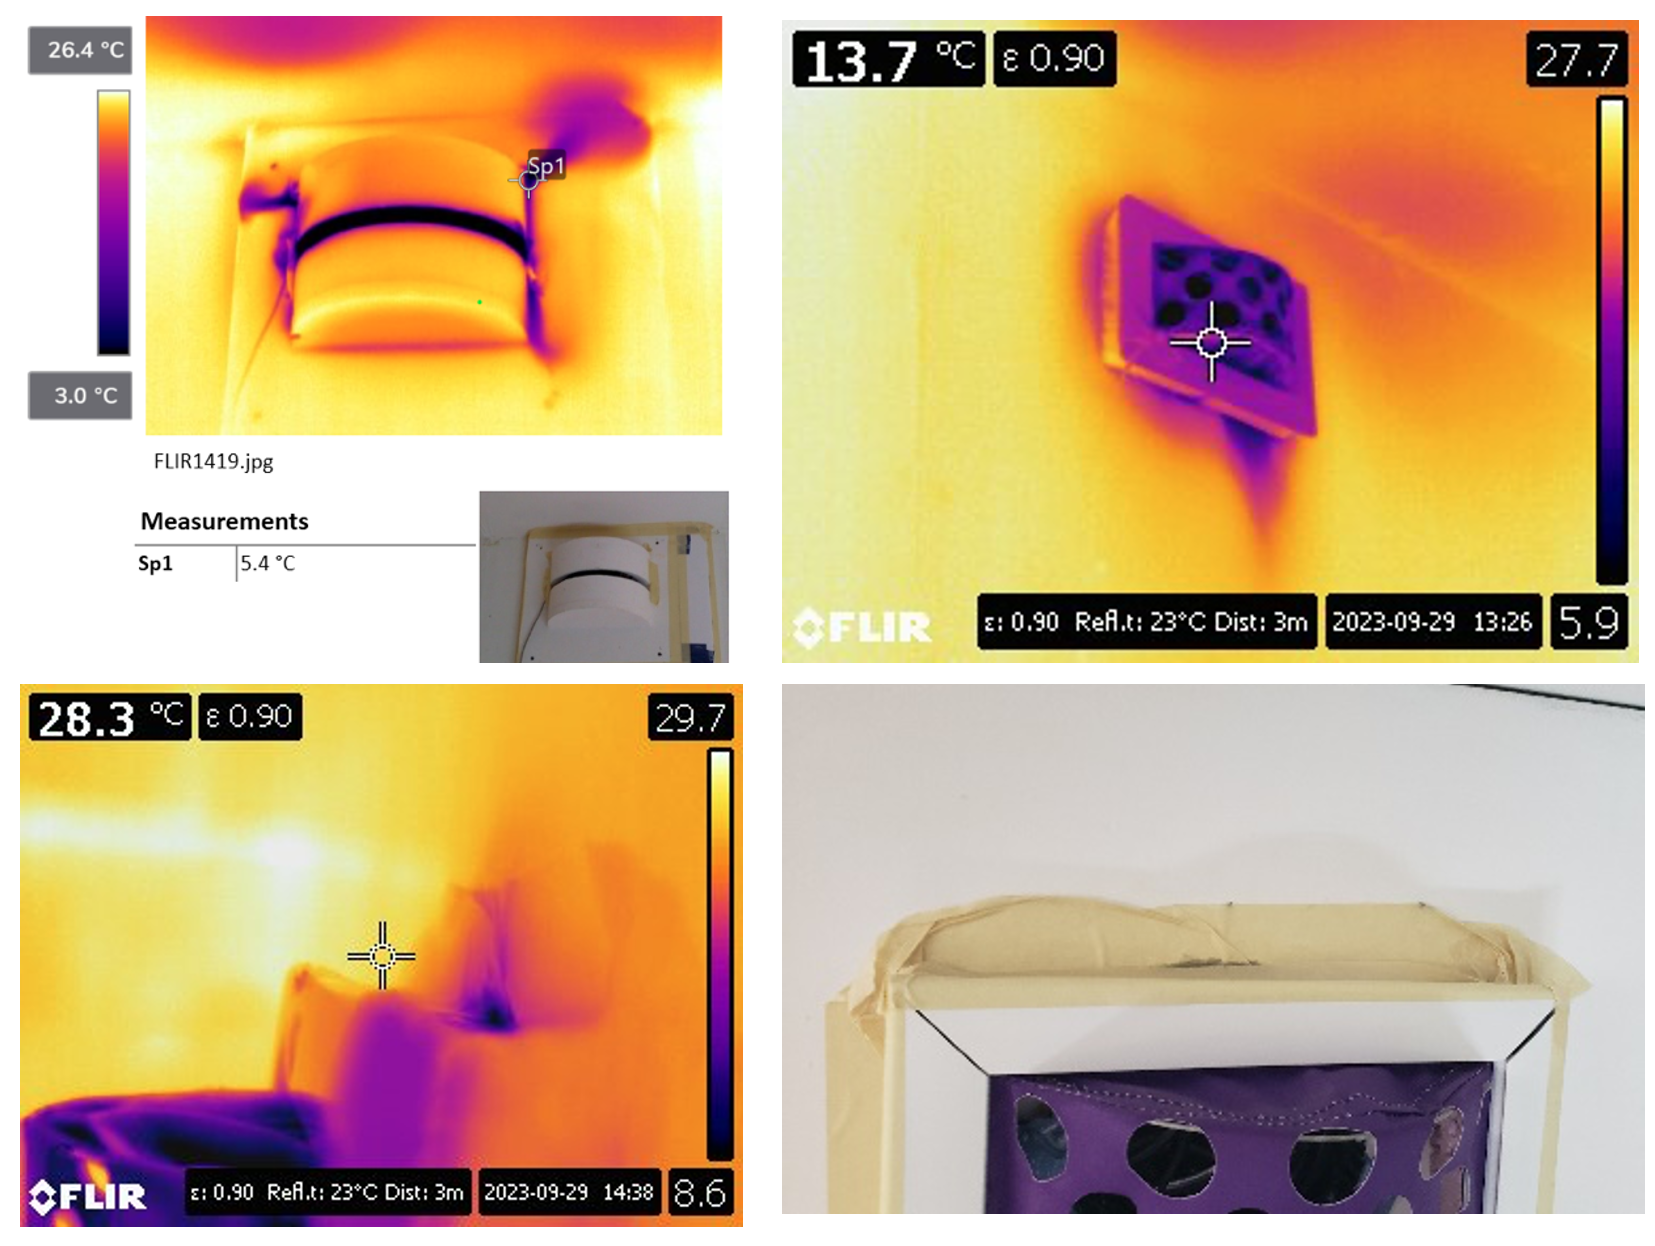 Figure 6: Images showing lower surface temperatures around the diffuser from air leakage caused by improper air sealing. Bottom right: image showing condensation at location of duct hole that was not properly covered.